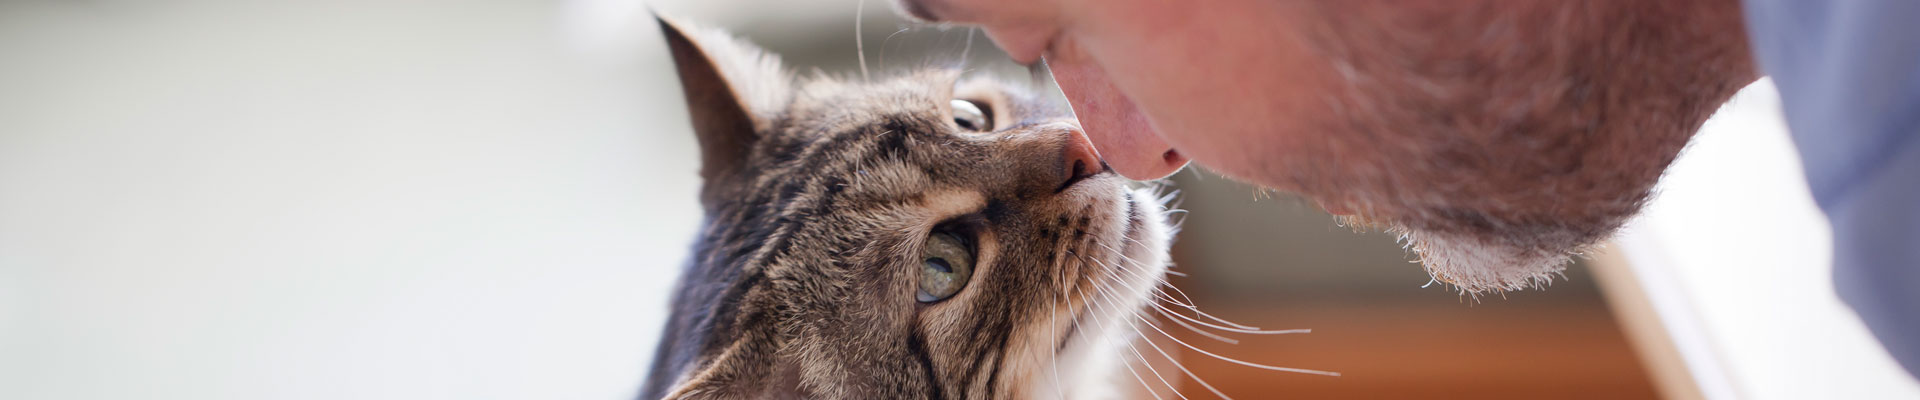 Man and brown cat are nose to nose.